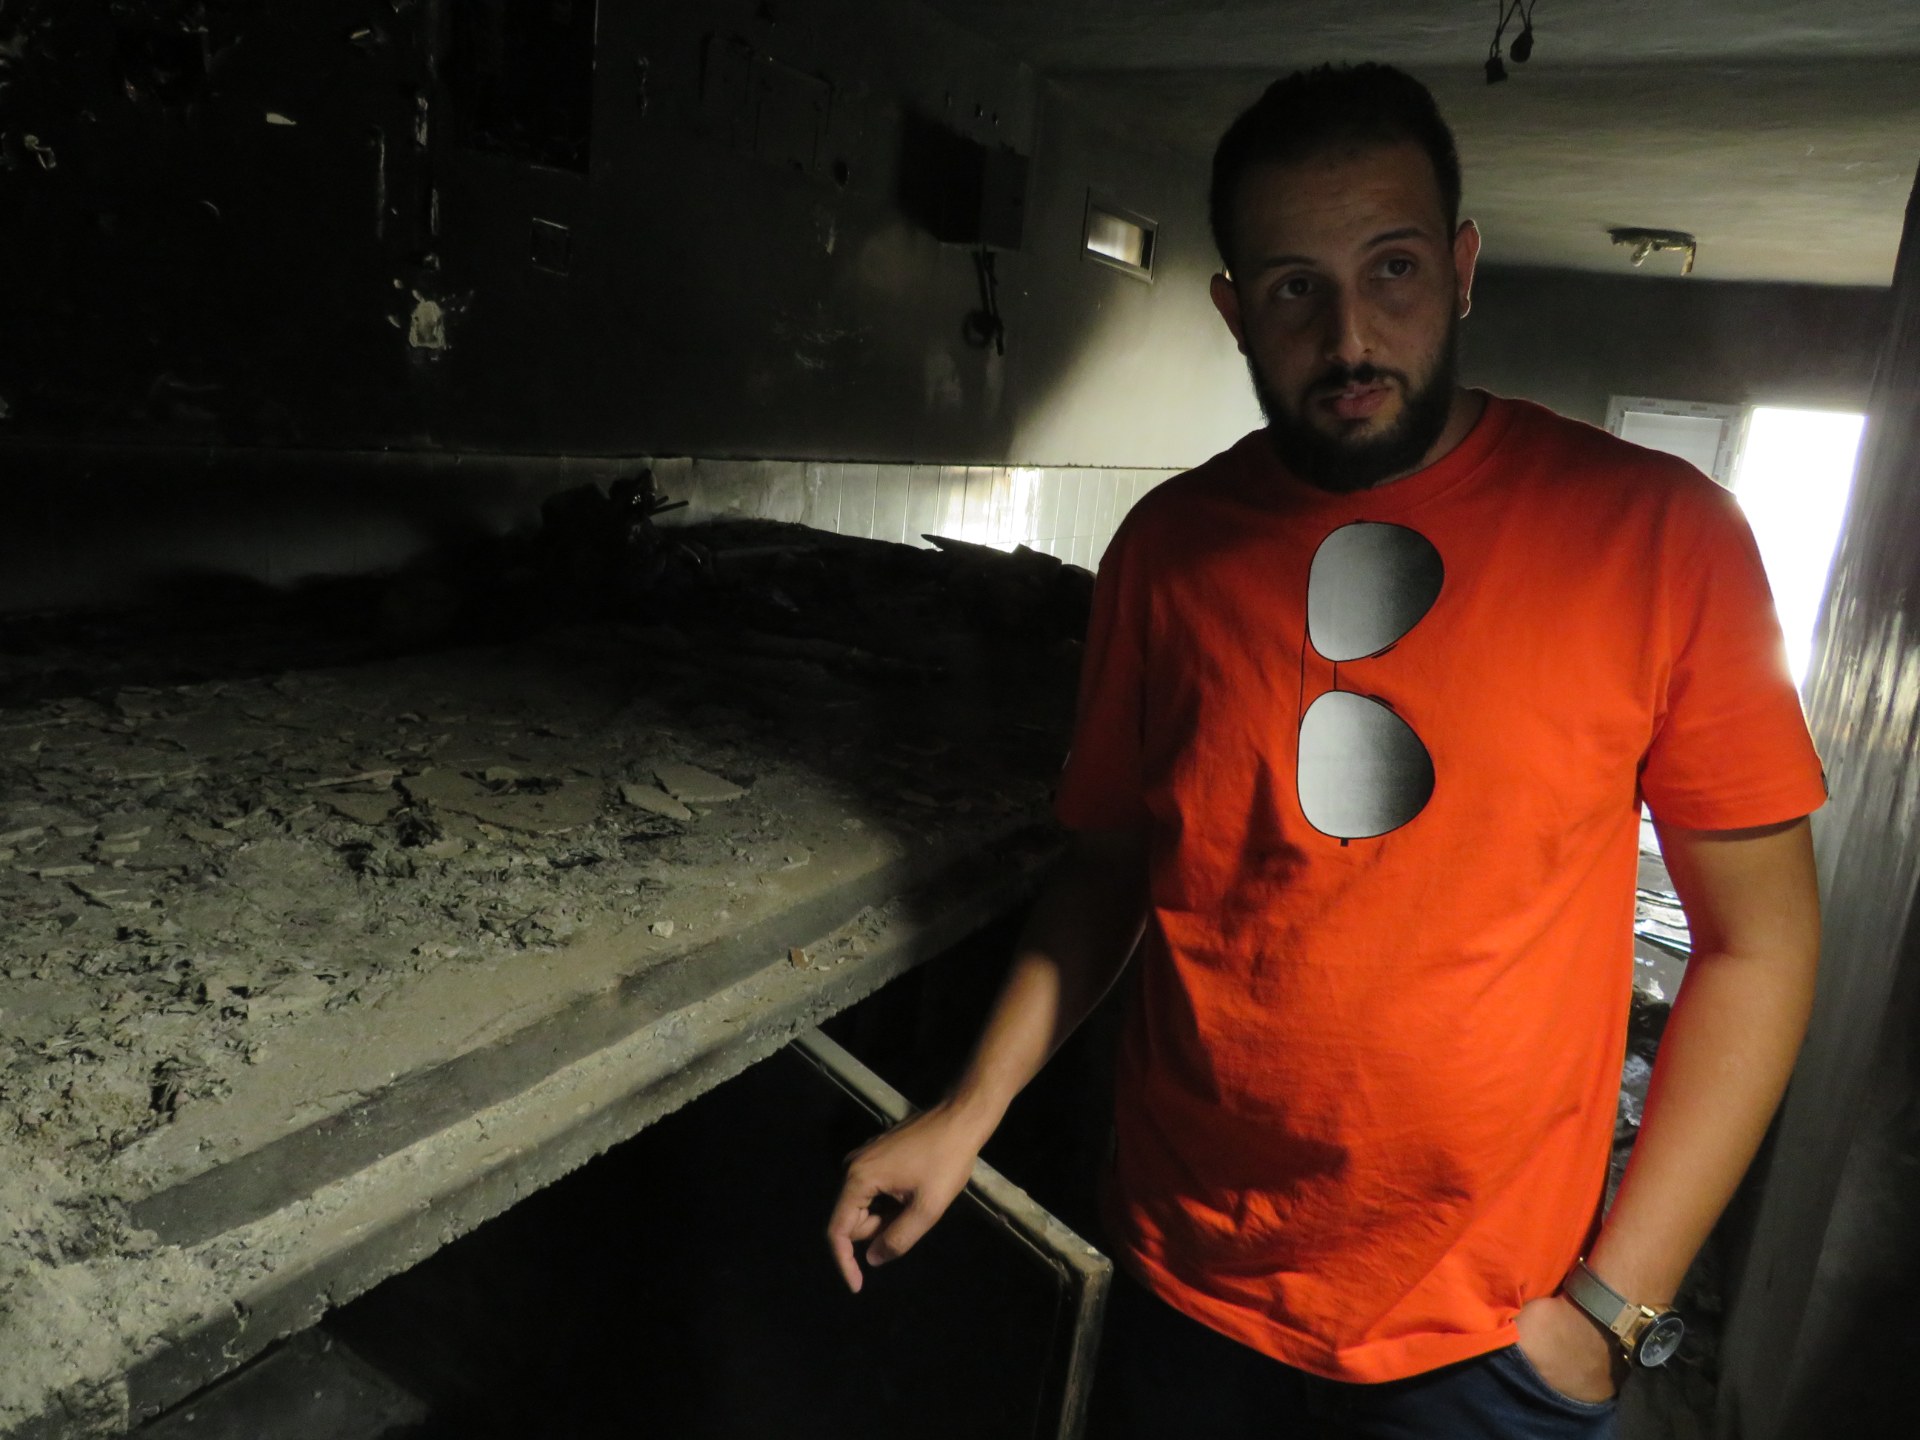 Ali Asaid Abu Zweid was kept in this oven-like cell for 45 days (MEE/Daniel Hilton)